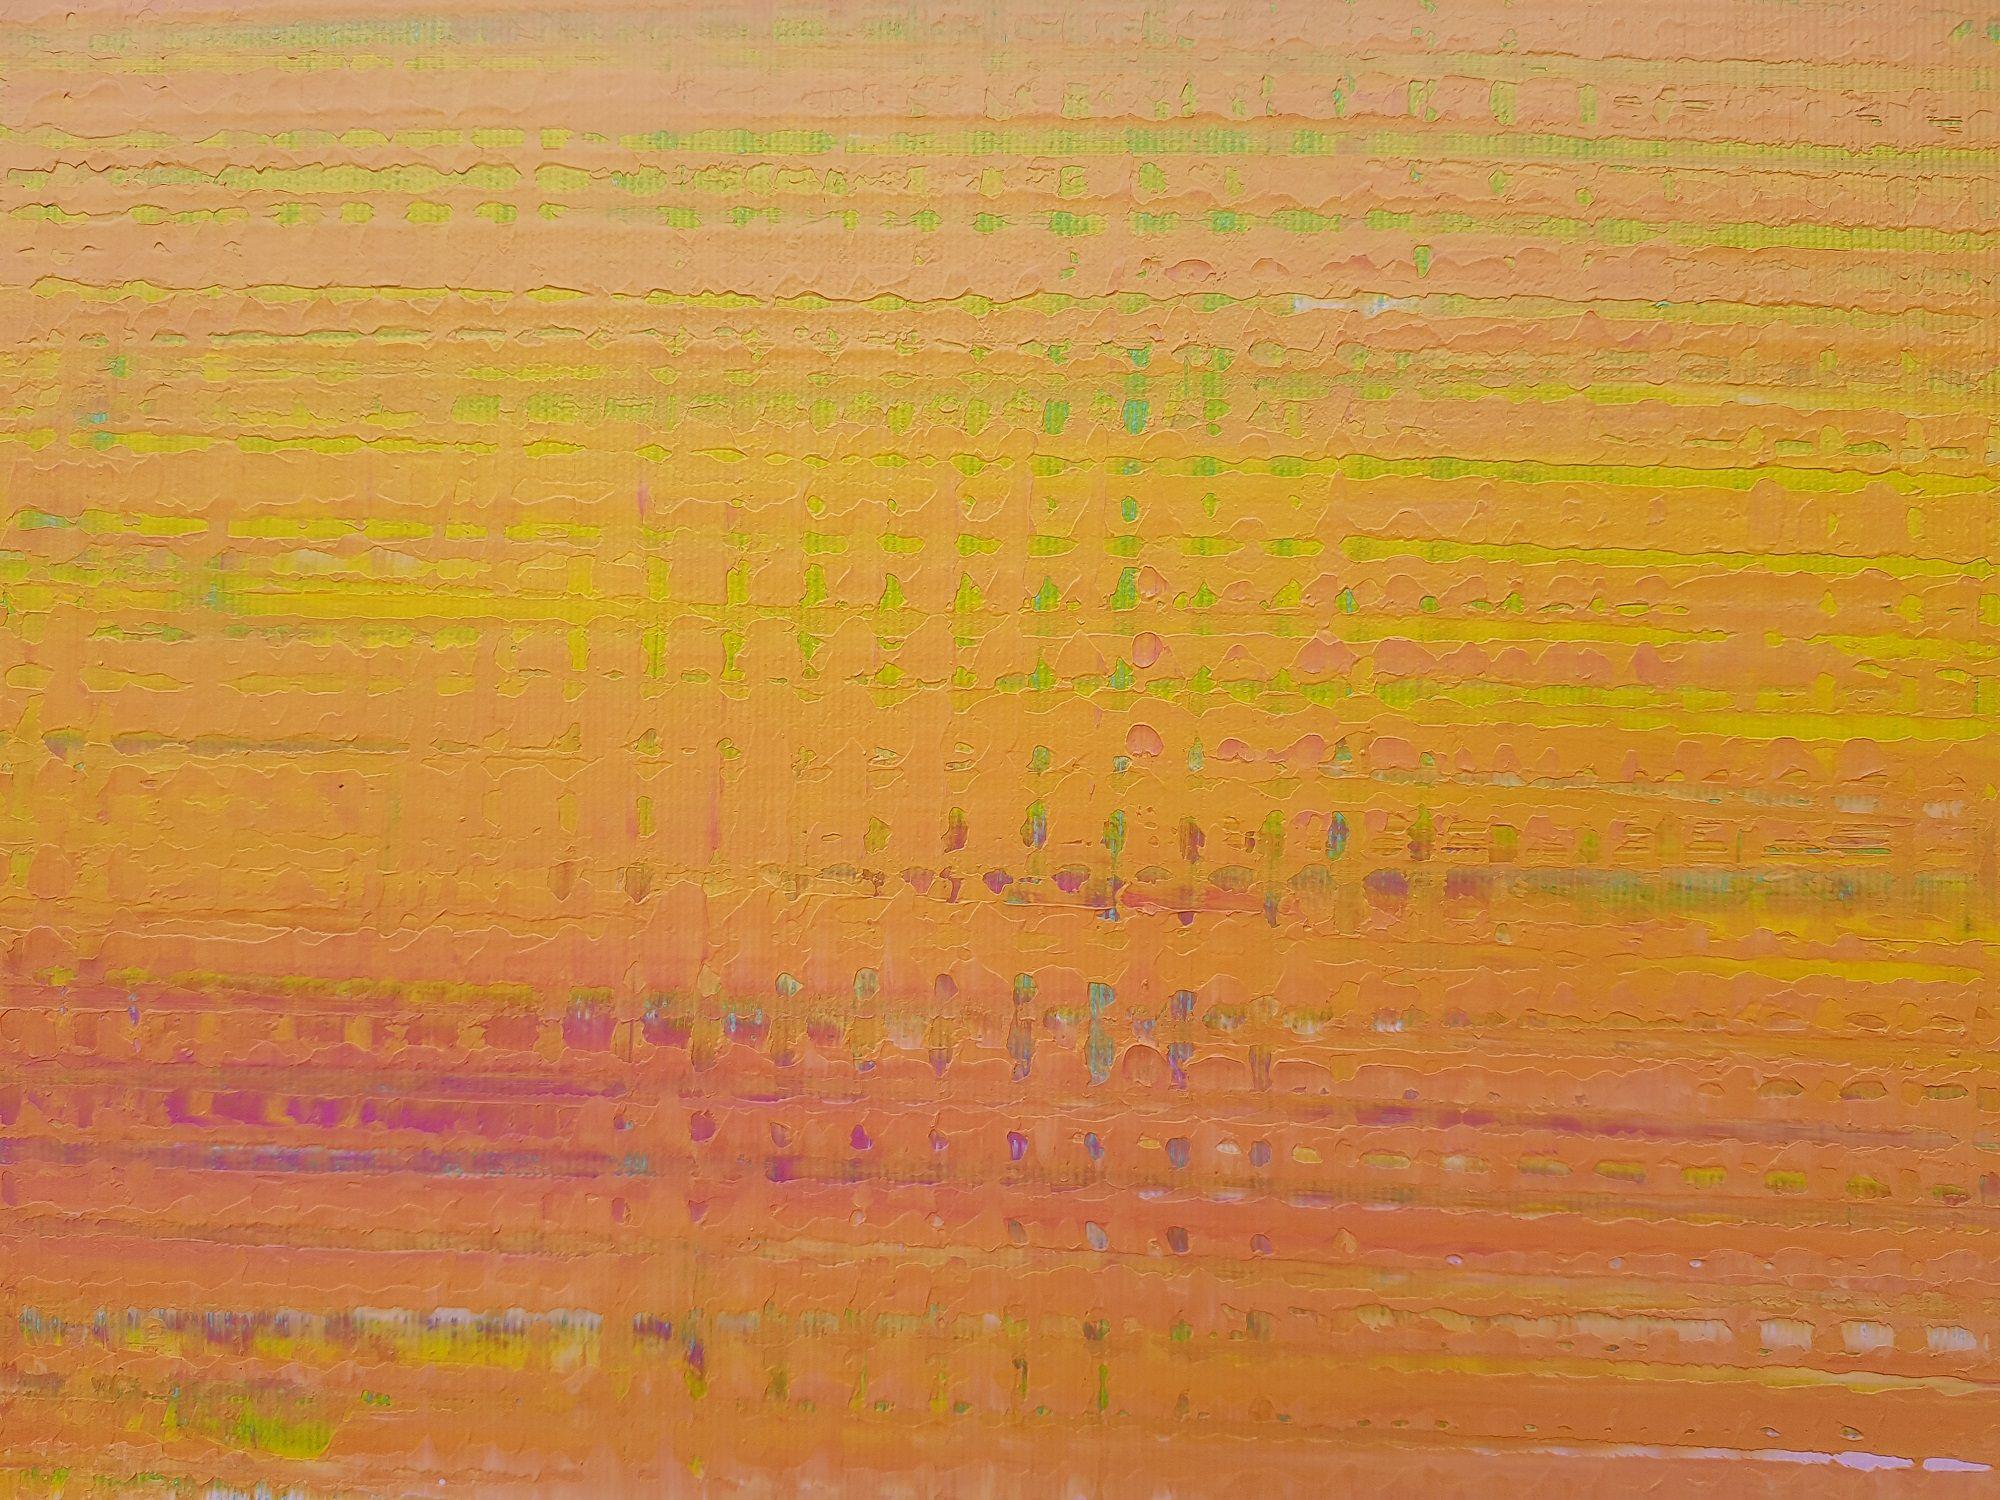 An original one-of-a-kind textured abstract painting.    Minimalistic yet powerful full of details    Shades of orange, yellow, and purple. thanks to the artist's signature techniques create a broken surface that allows the background colors to come